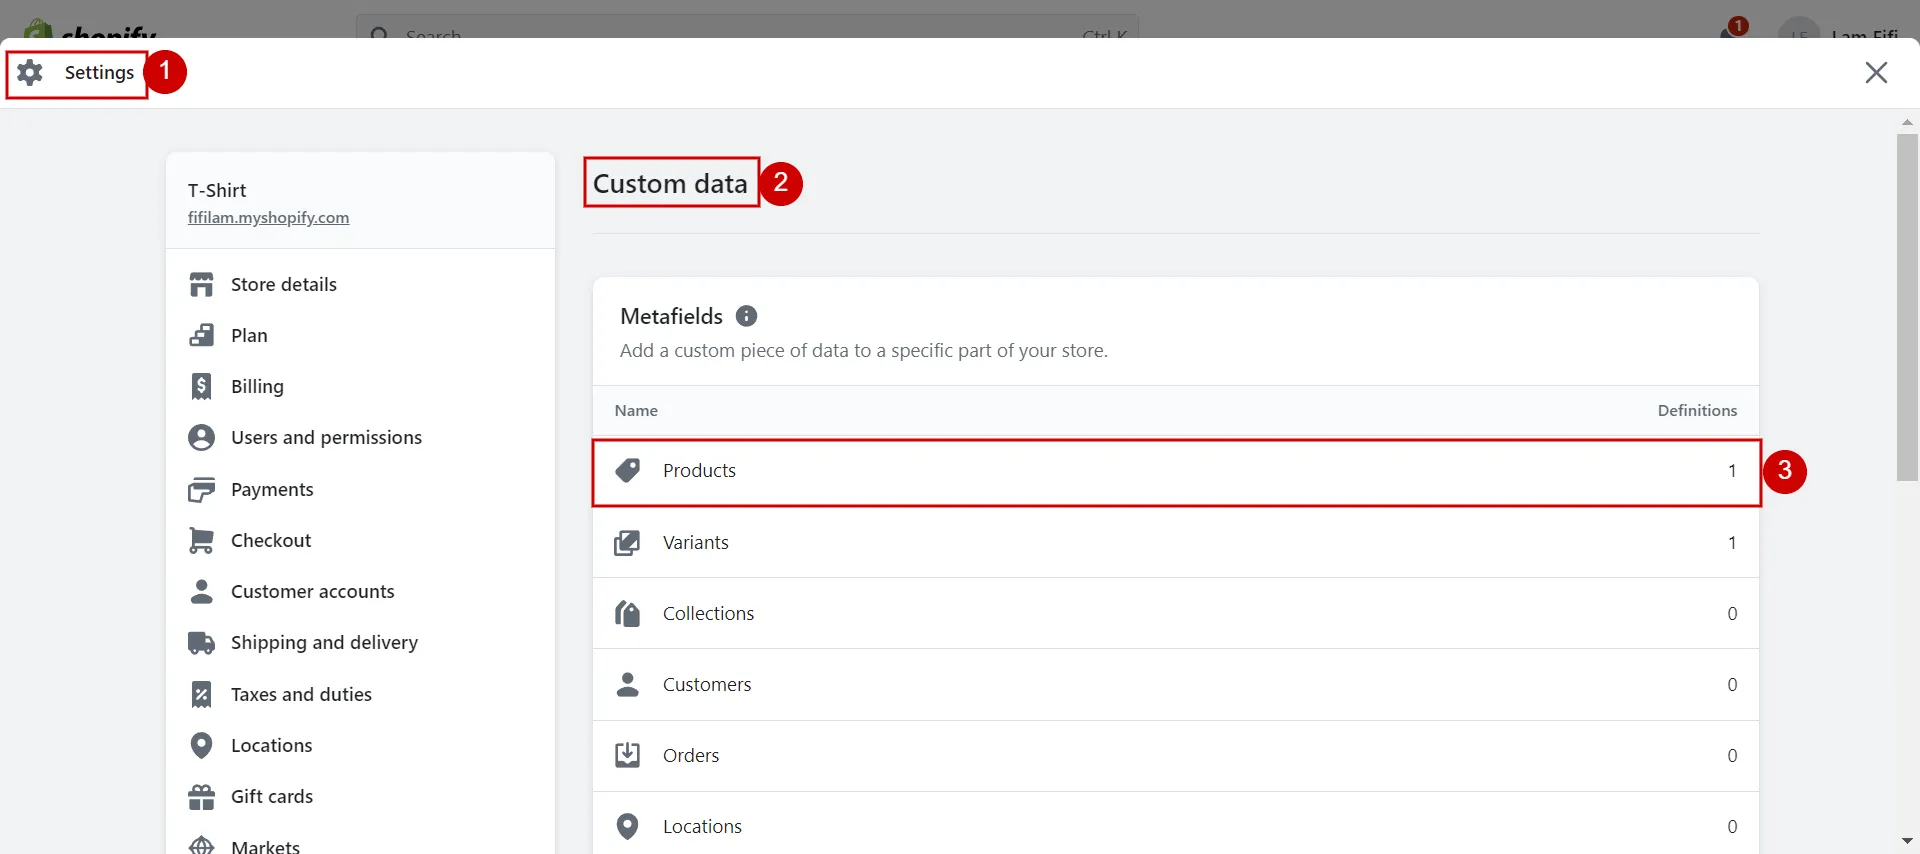 Go to Custom Data and choose Products